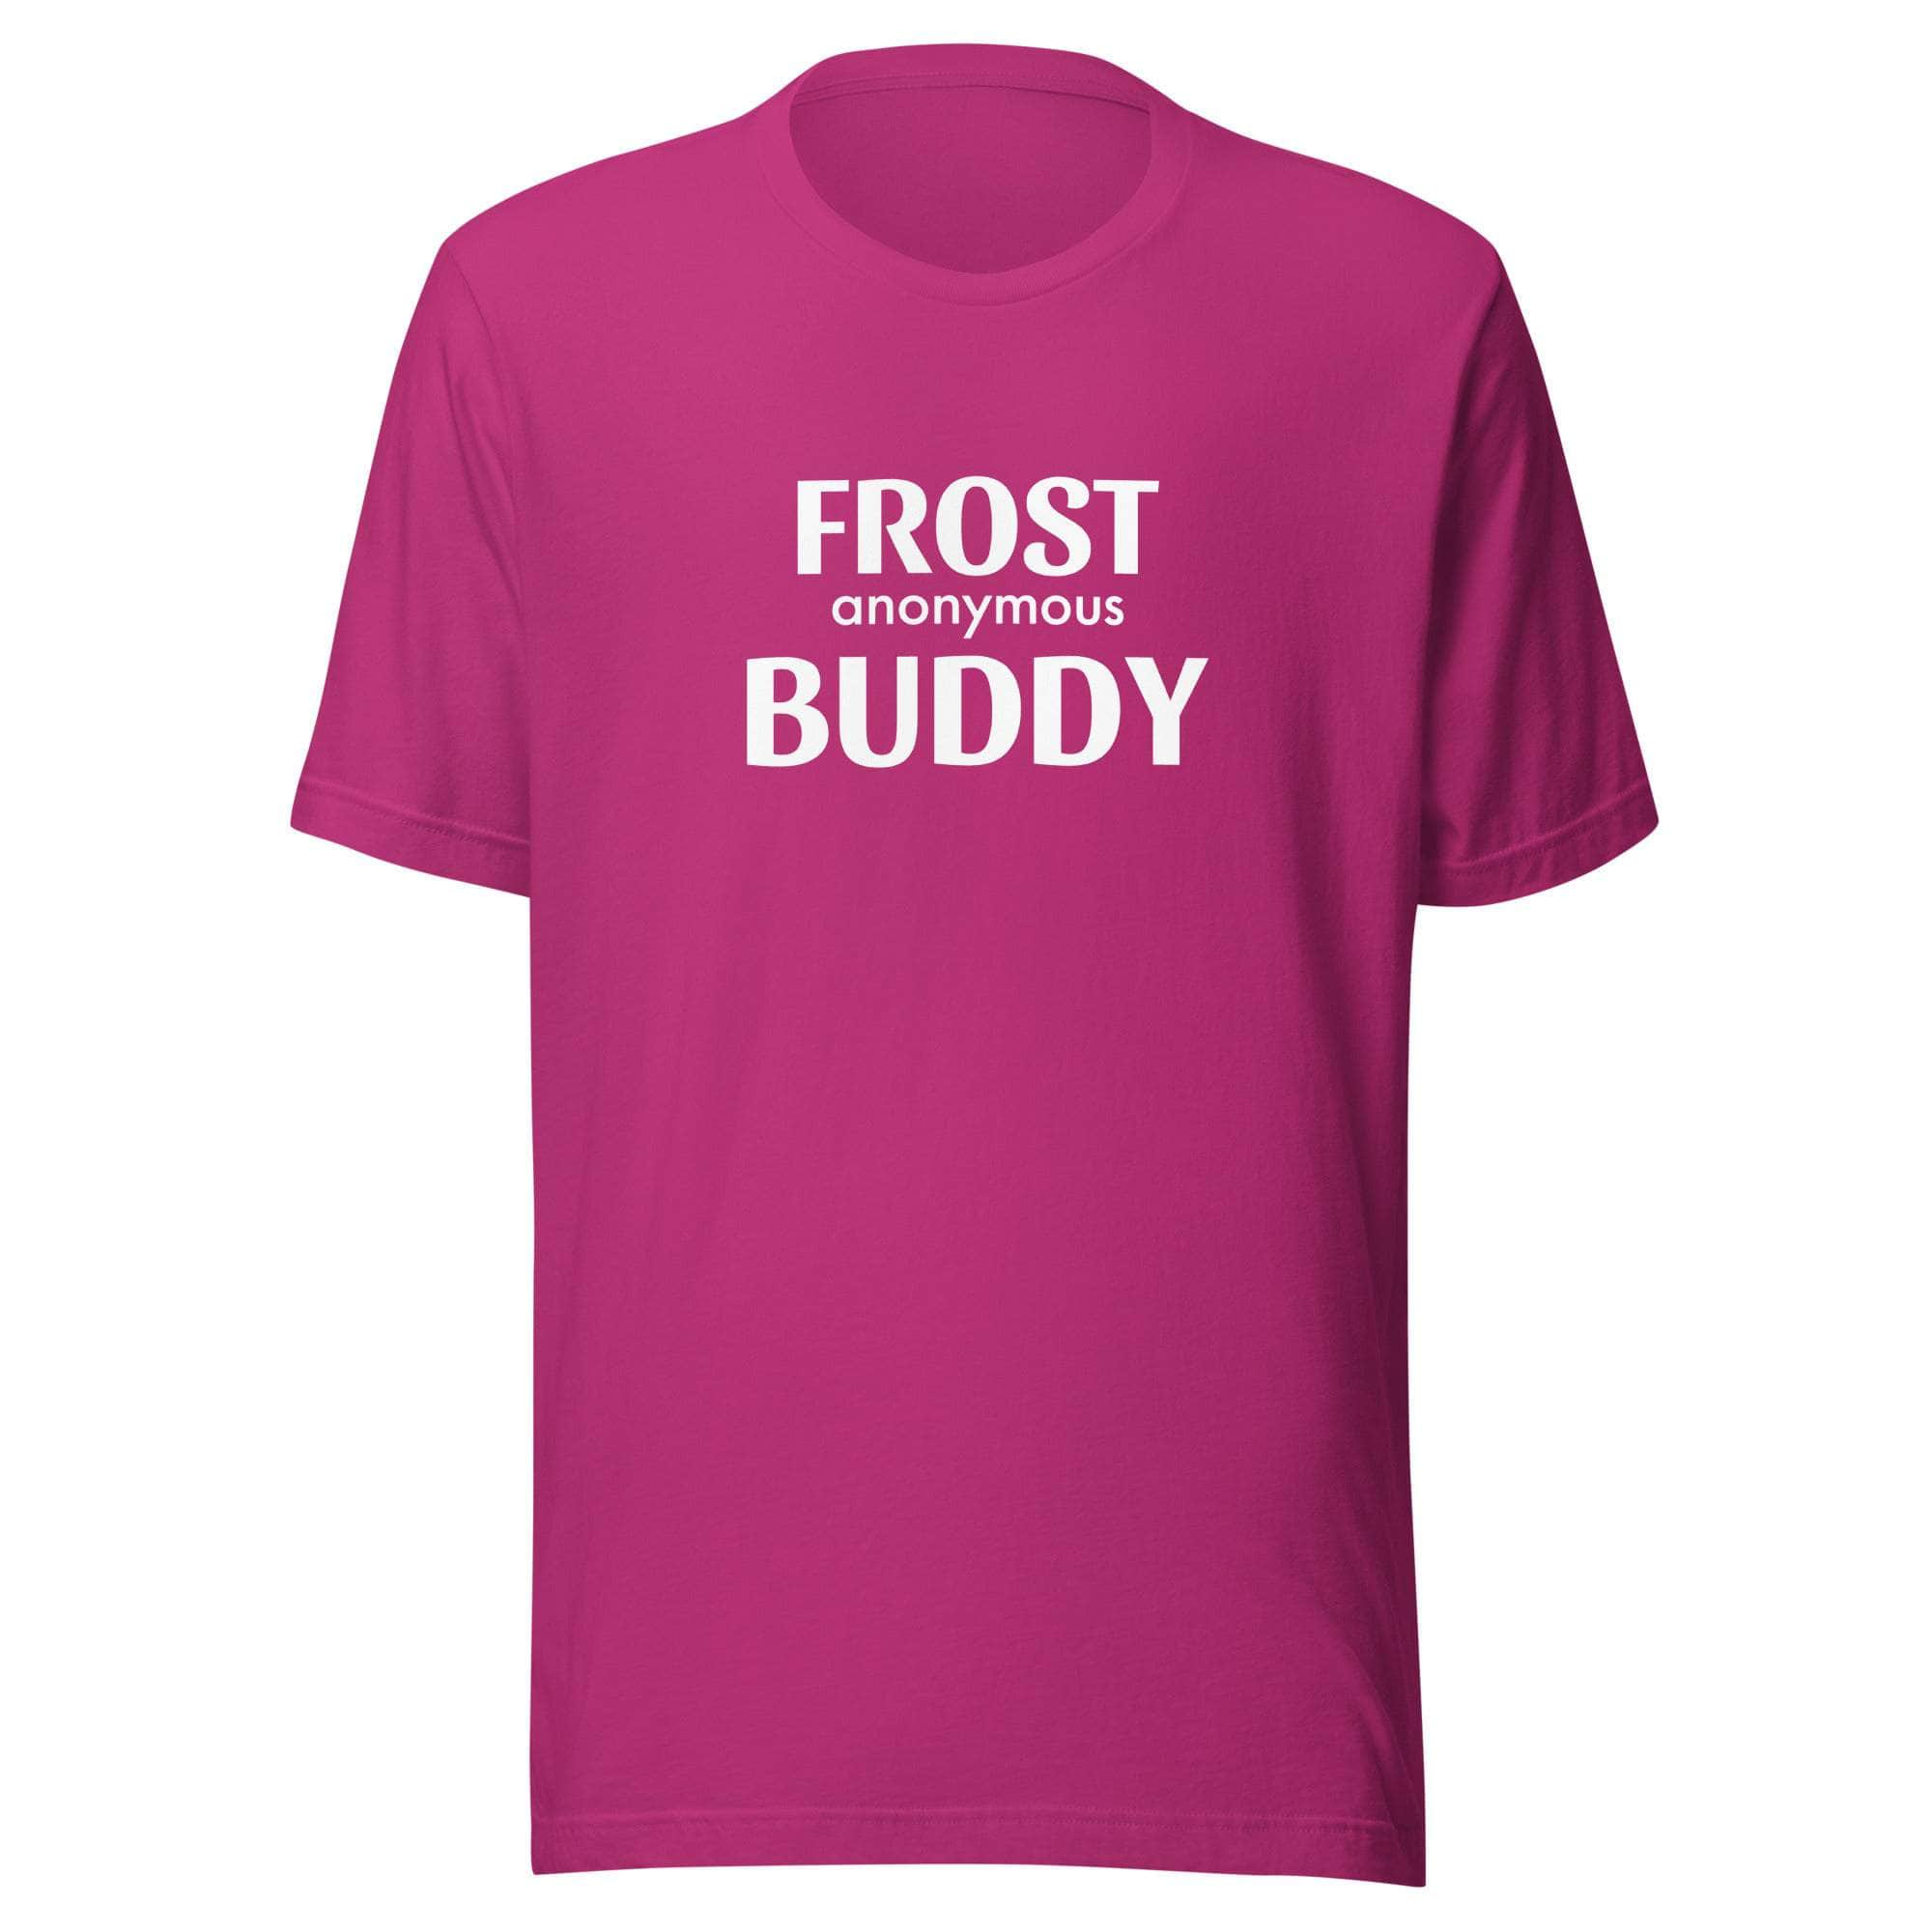 Frost Buddy  Berry / S Frost Buddy Anonymous Unisex T-shirt